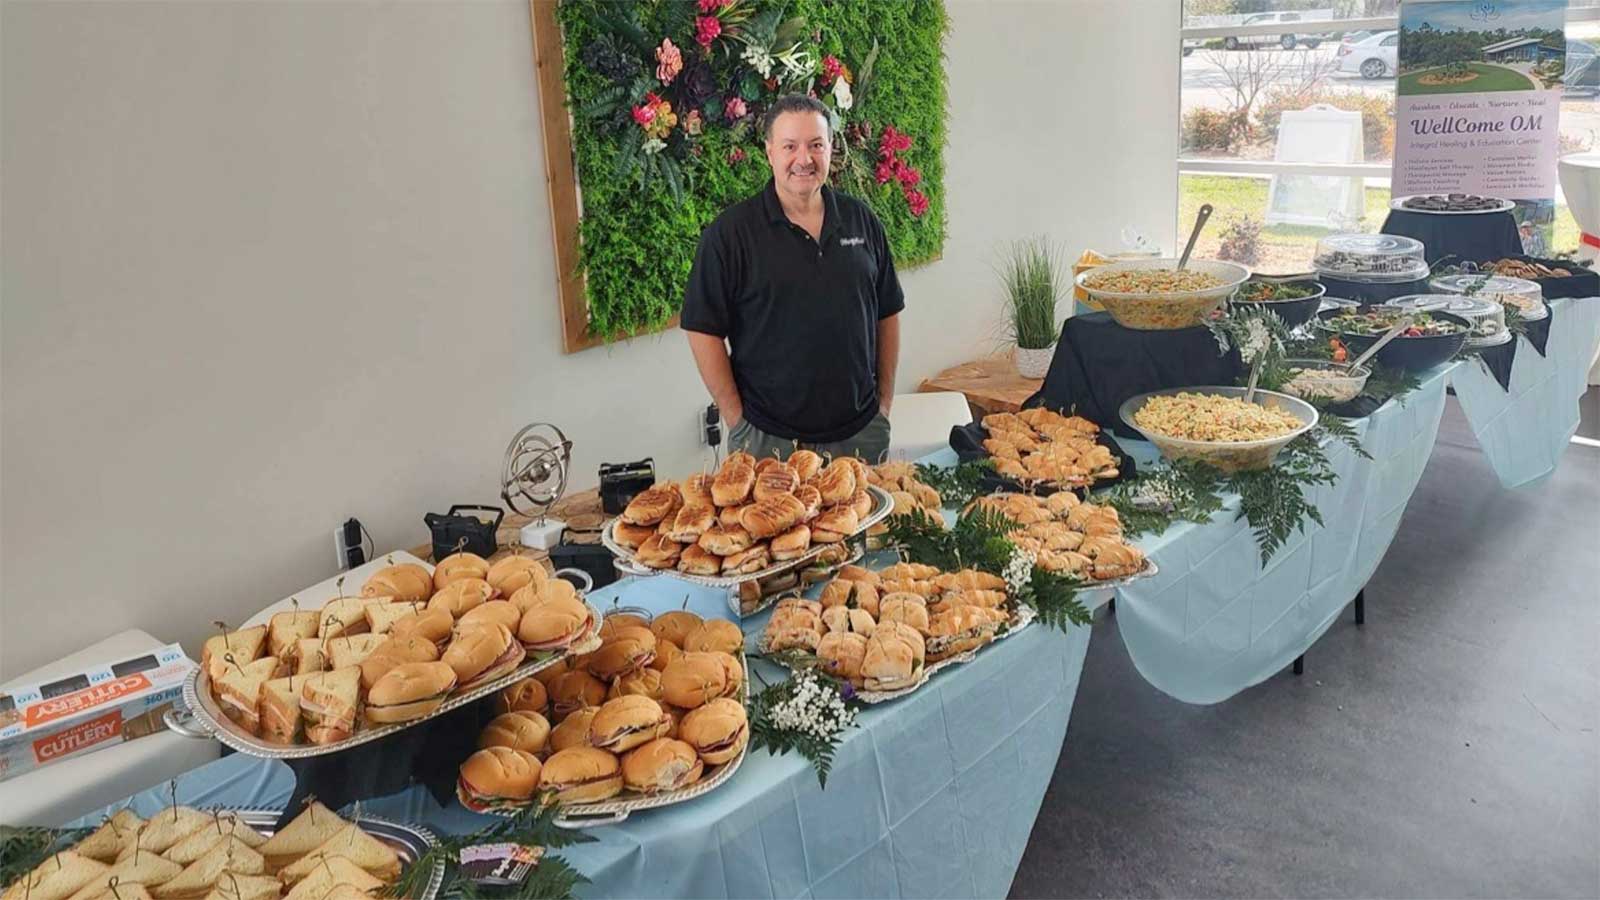 A smiling caterer stands proudly by a well-arranged buffet table filled with a variety of sandwiches and pasta dishes at a Corporate Wellness Event.